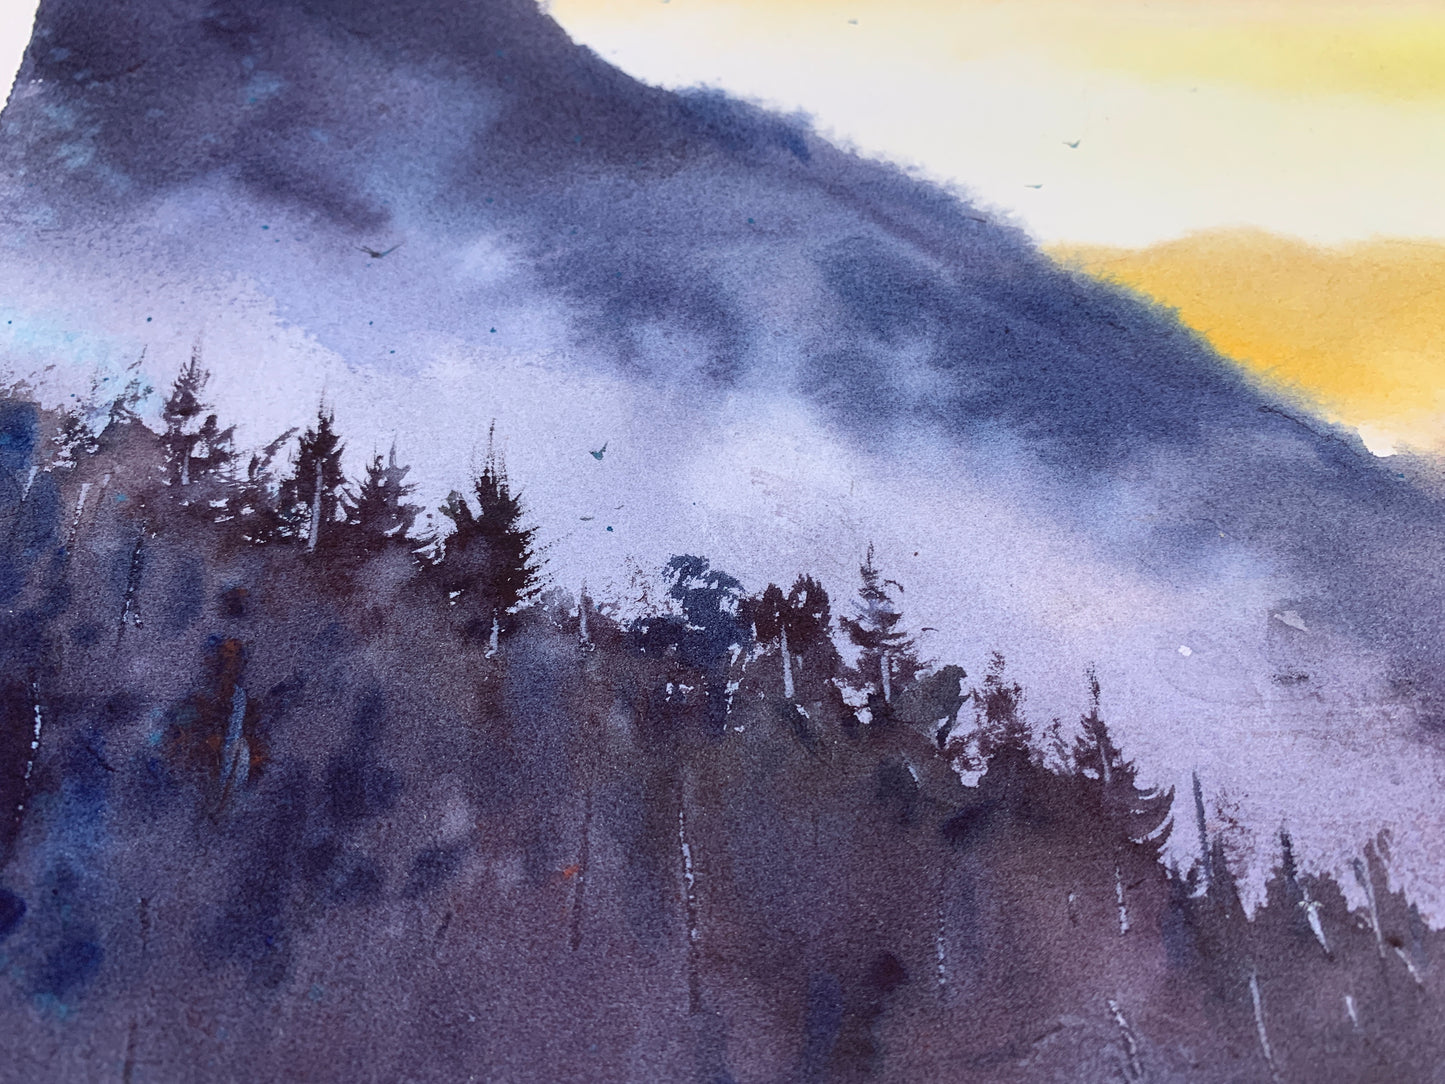 Panoramic Mountain Painting Watercolor Original - Sunset in the mountains #3 - 10 x 27 in